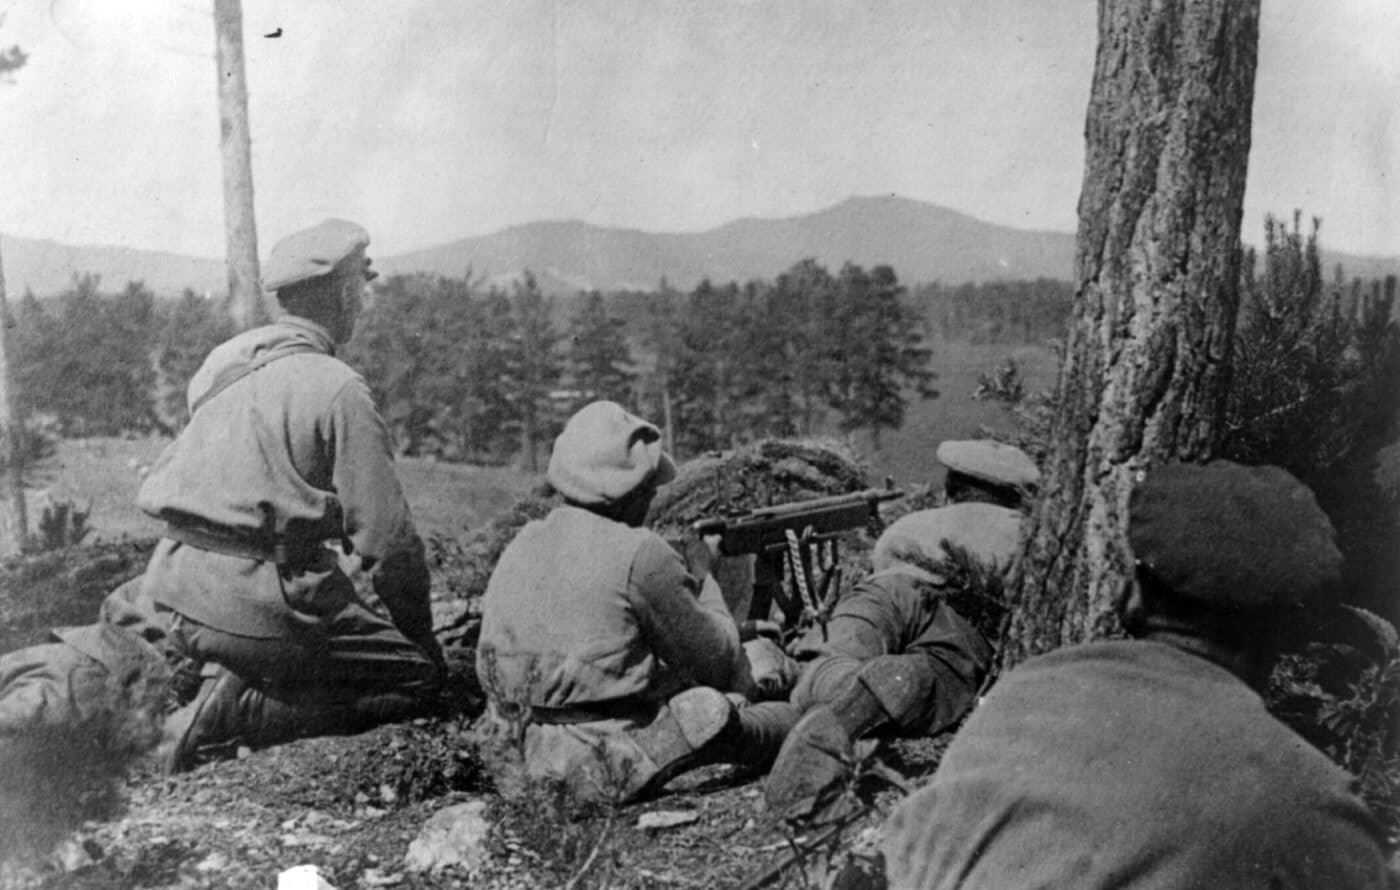 Browning M1895 in use by soldiers during the Russian civil war